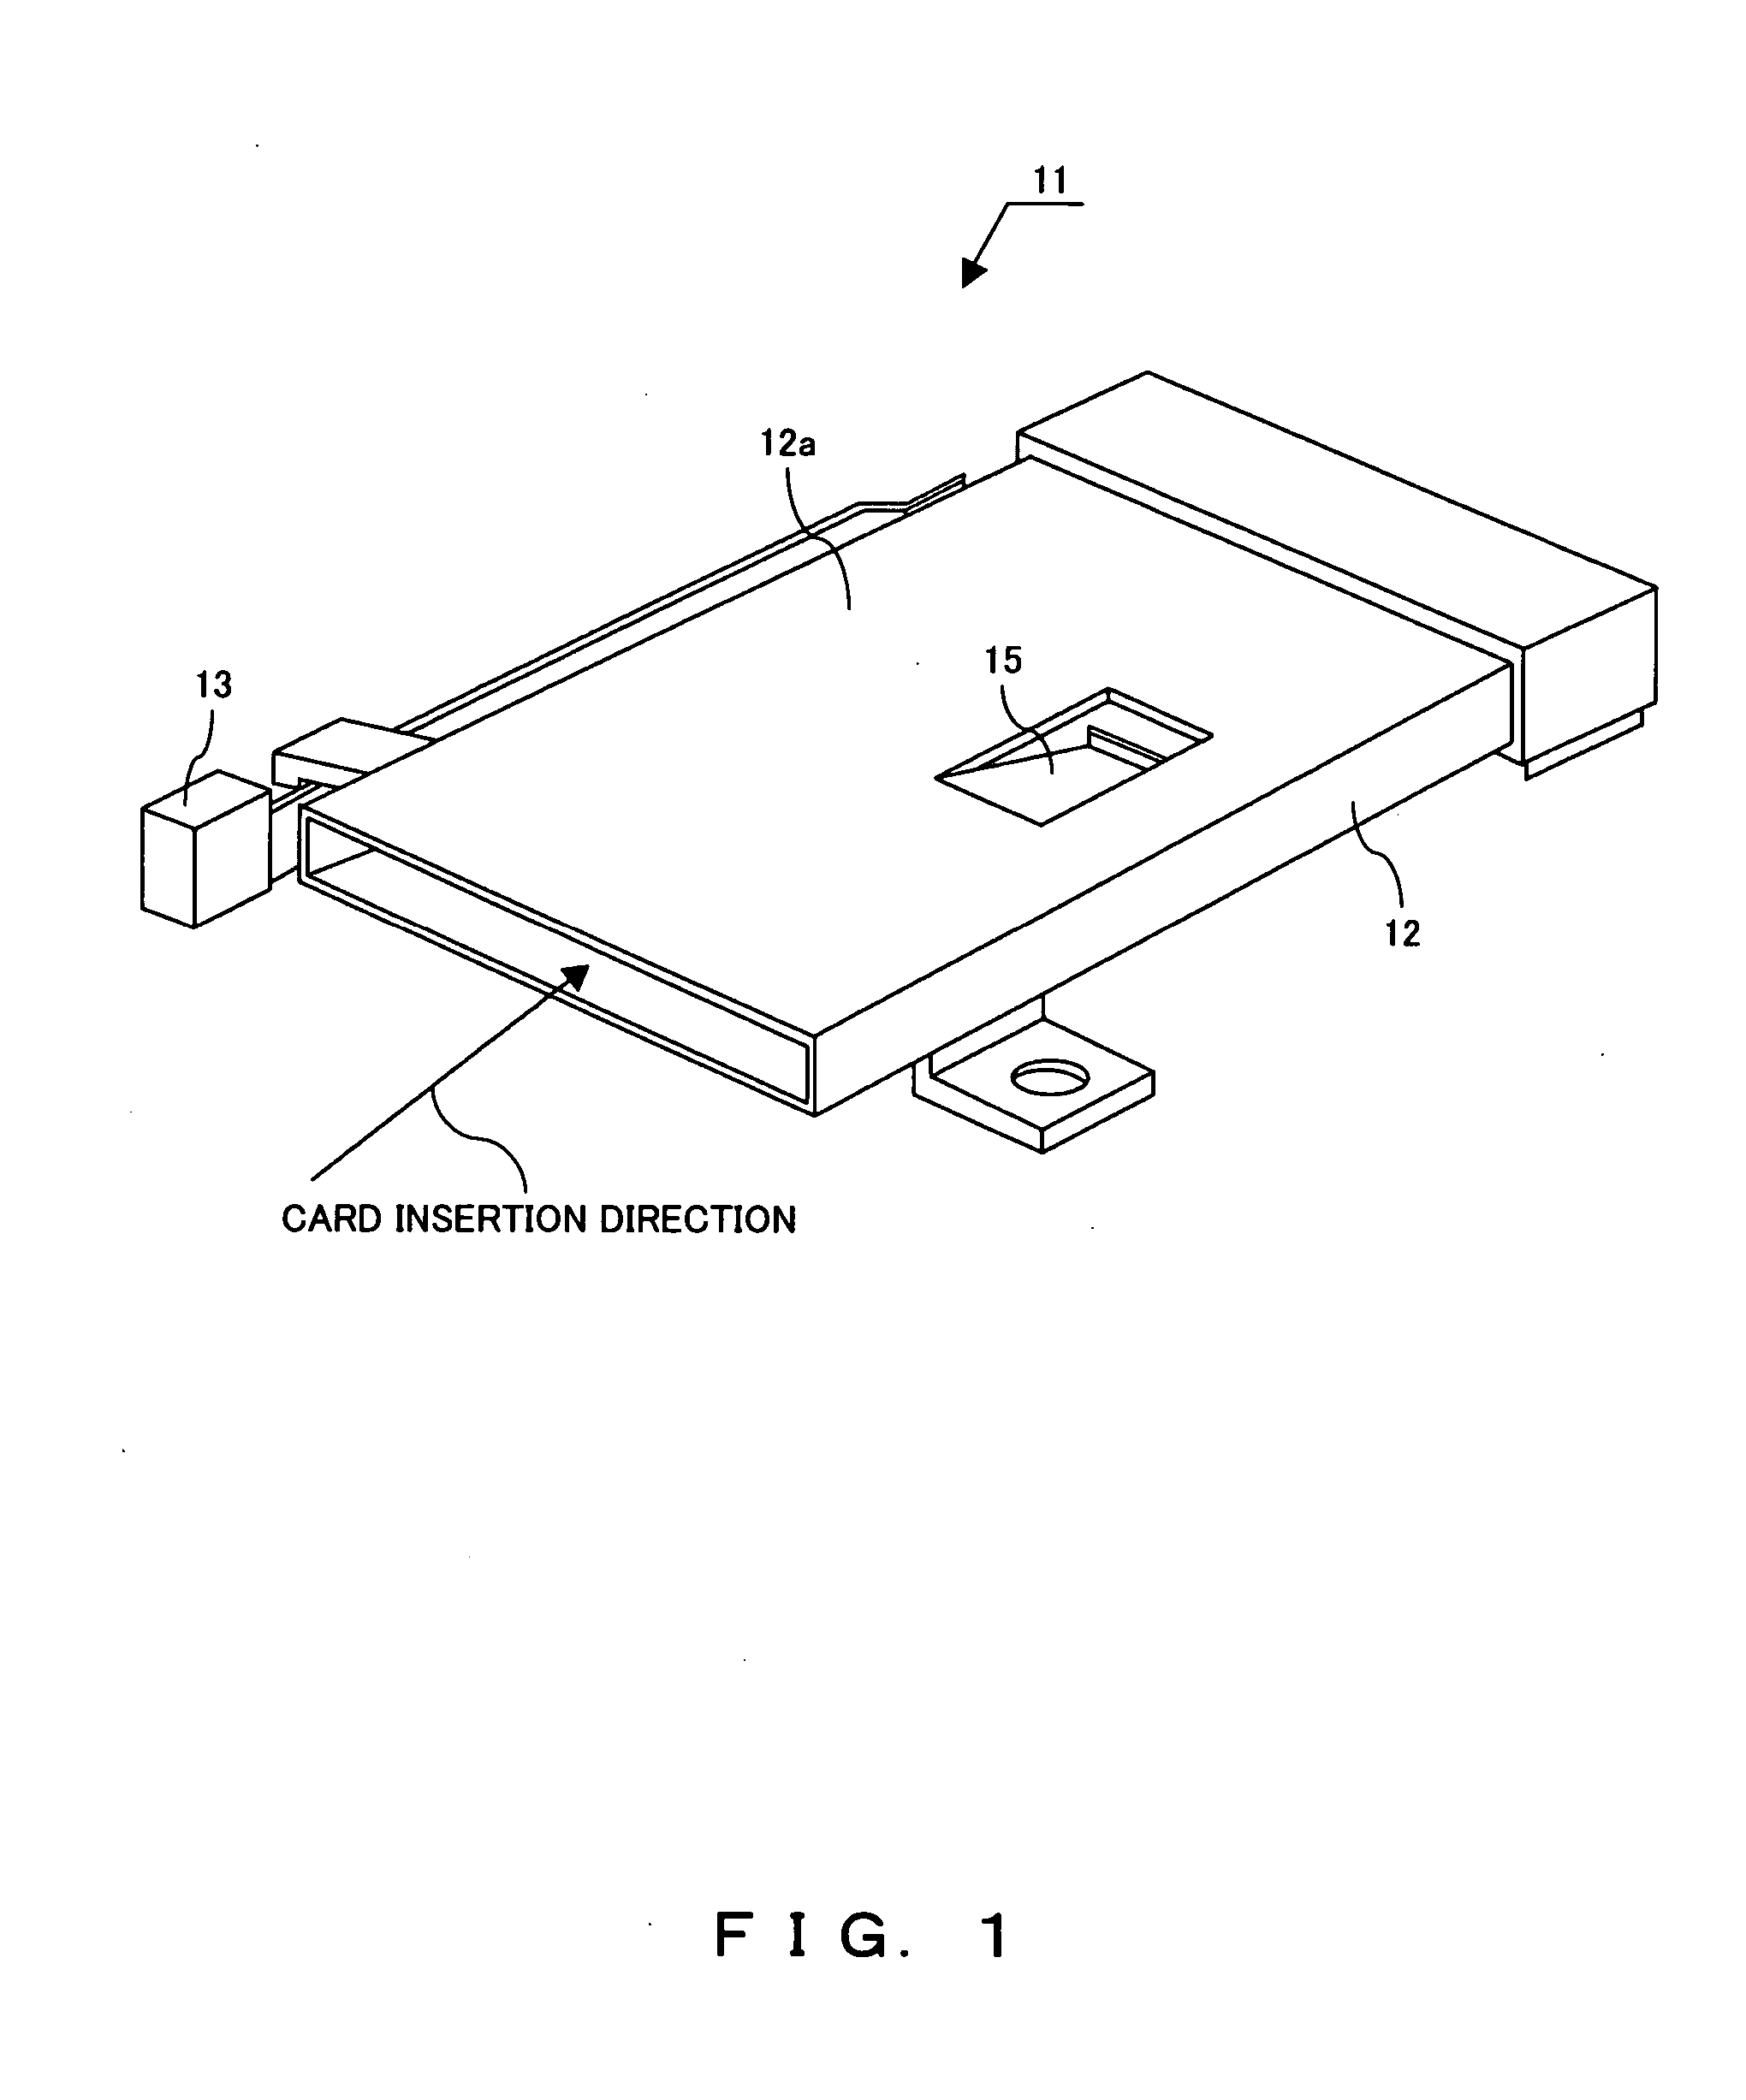 Card connector device